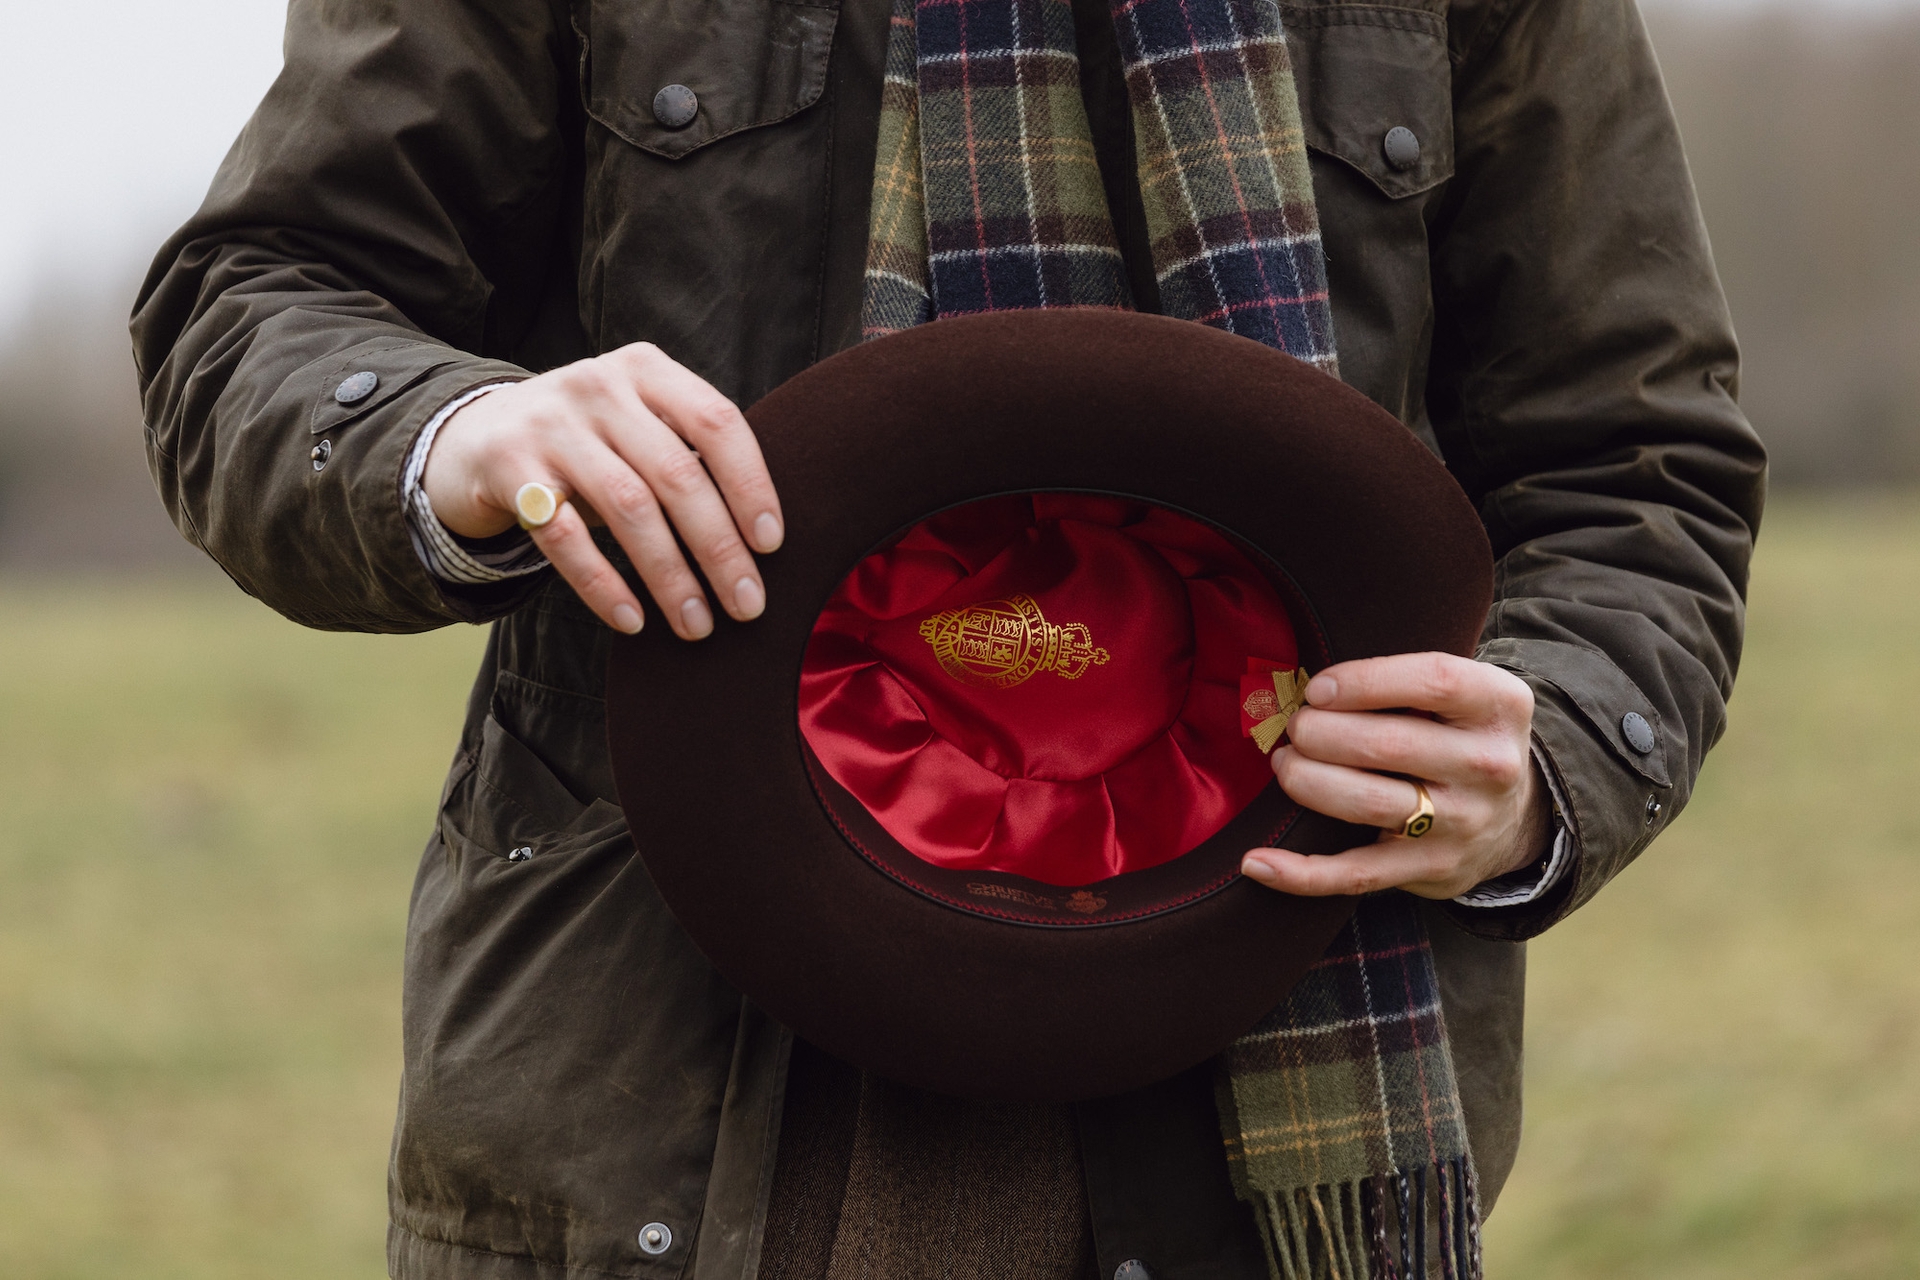 A man in a field showing the red interior of a brown Christys’ hat